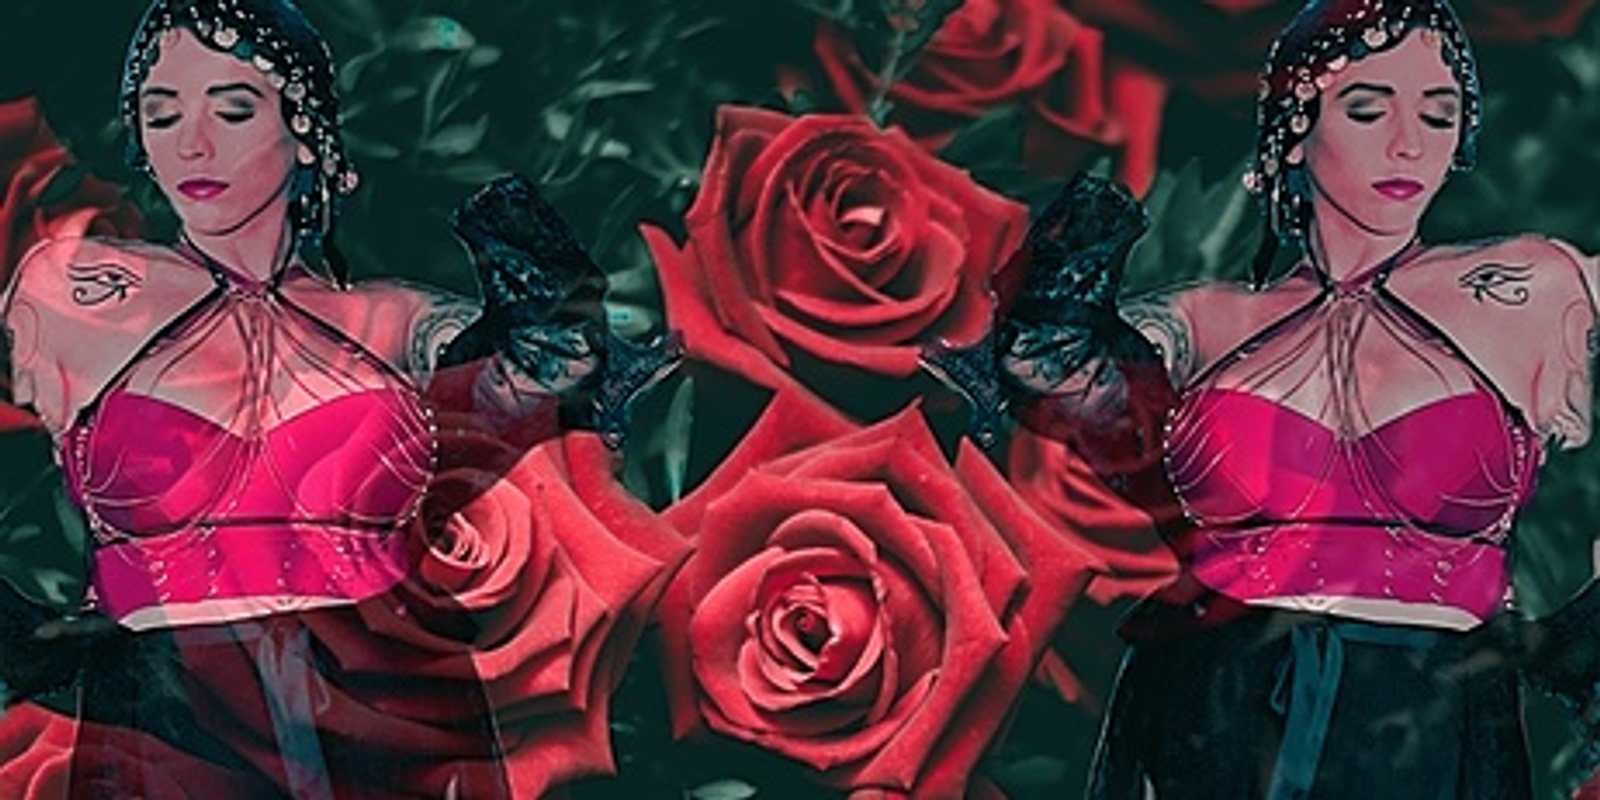 Banner image for The Red Rose: Tantric Bliss Temple Night